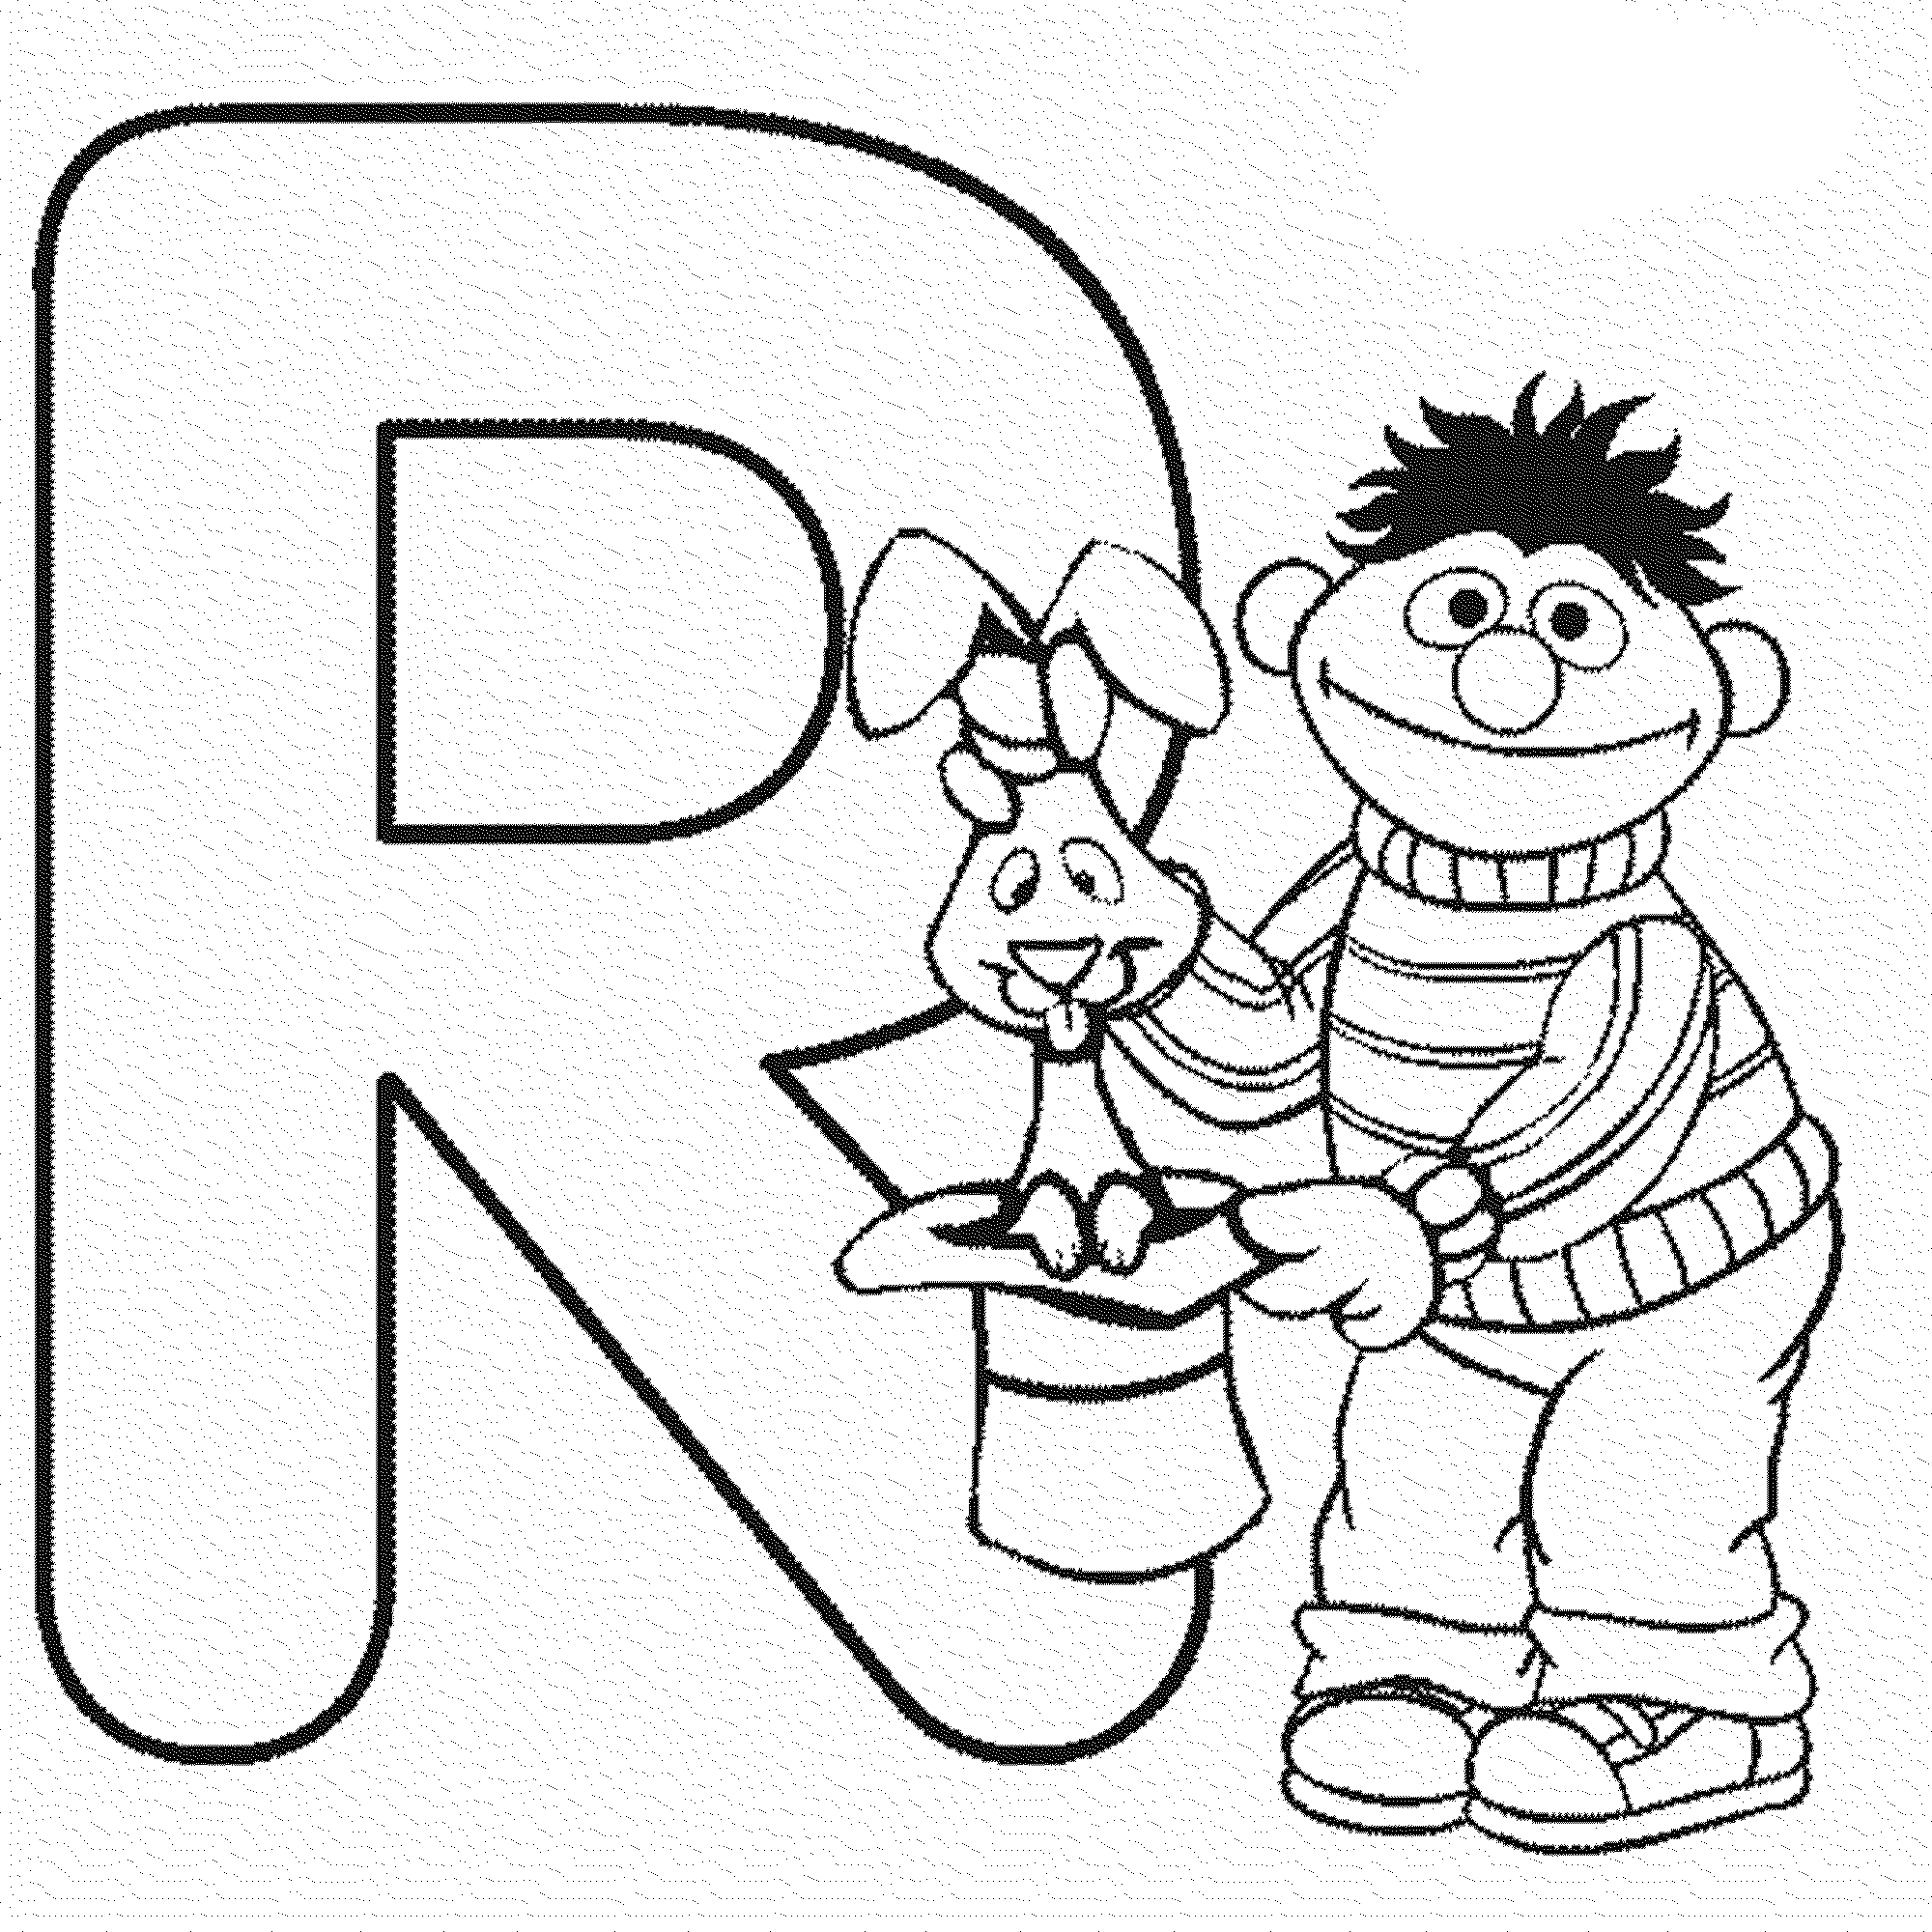 abc blocks coloring pages - Printable Kids Colouring Pages